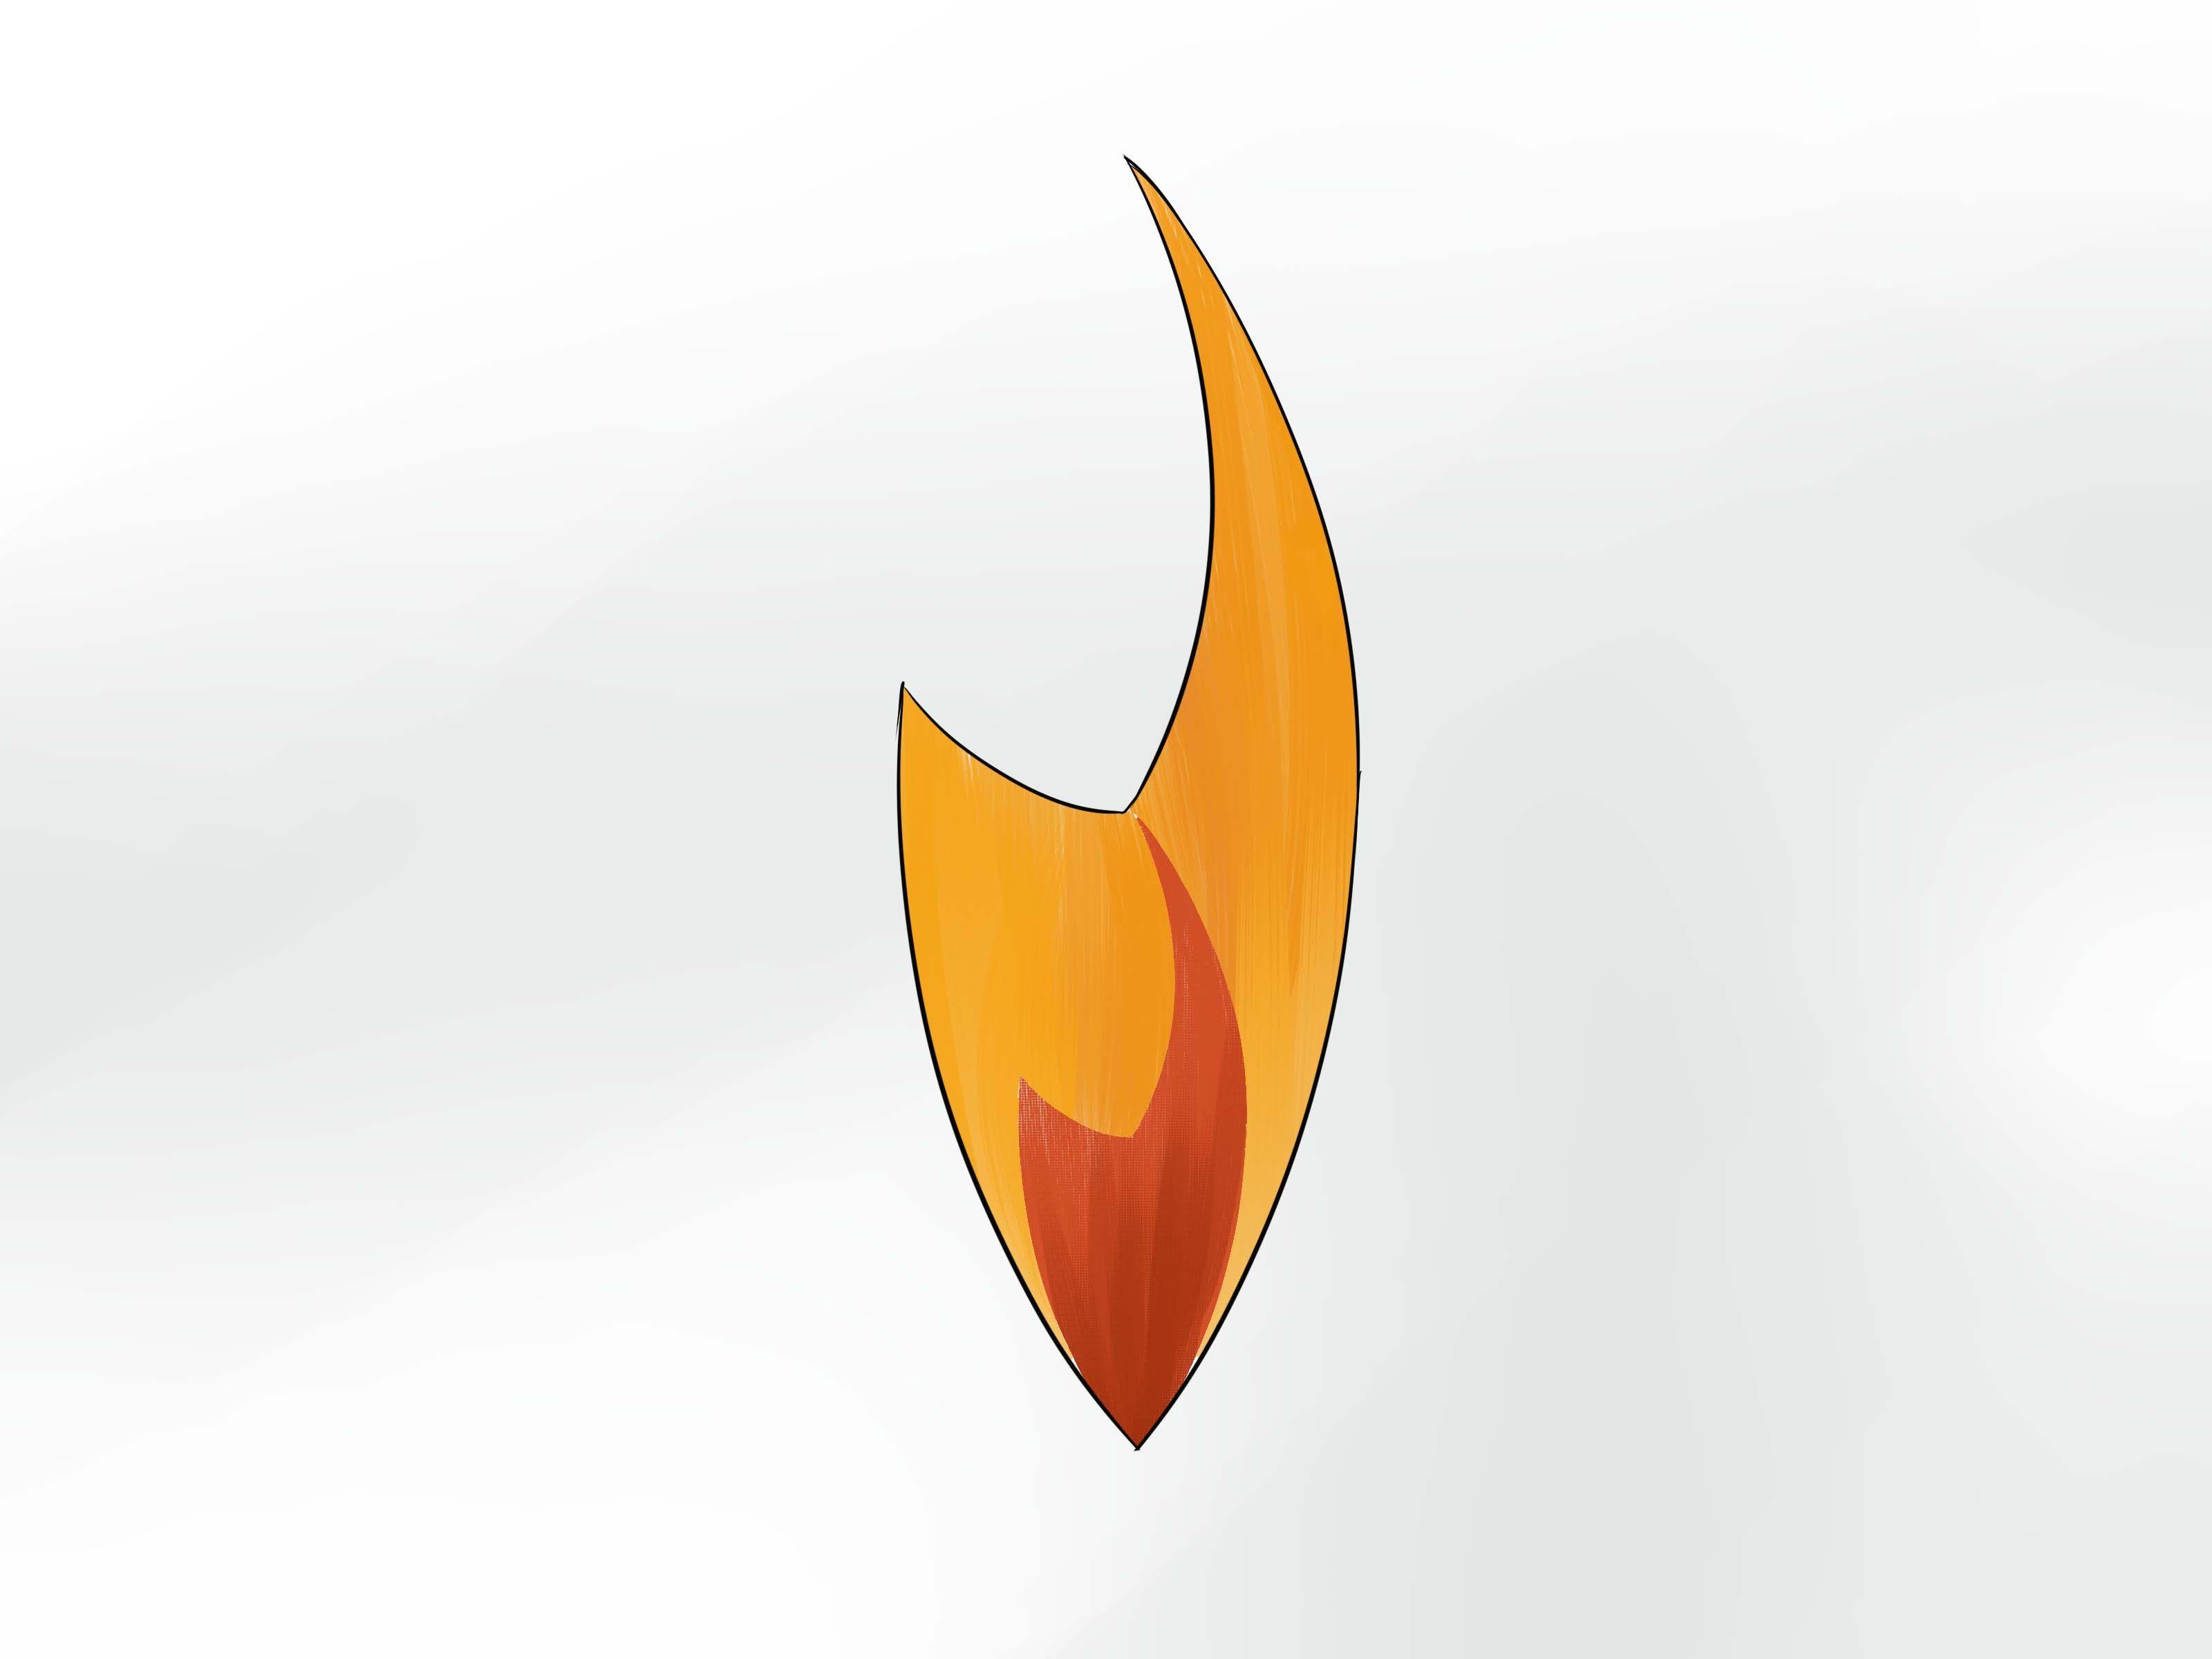 Cool Fire Logo - Fire Symbol: 10 Steps (with Picture)